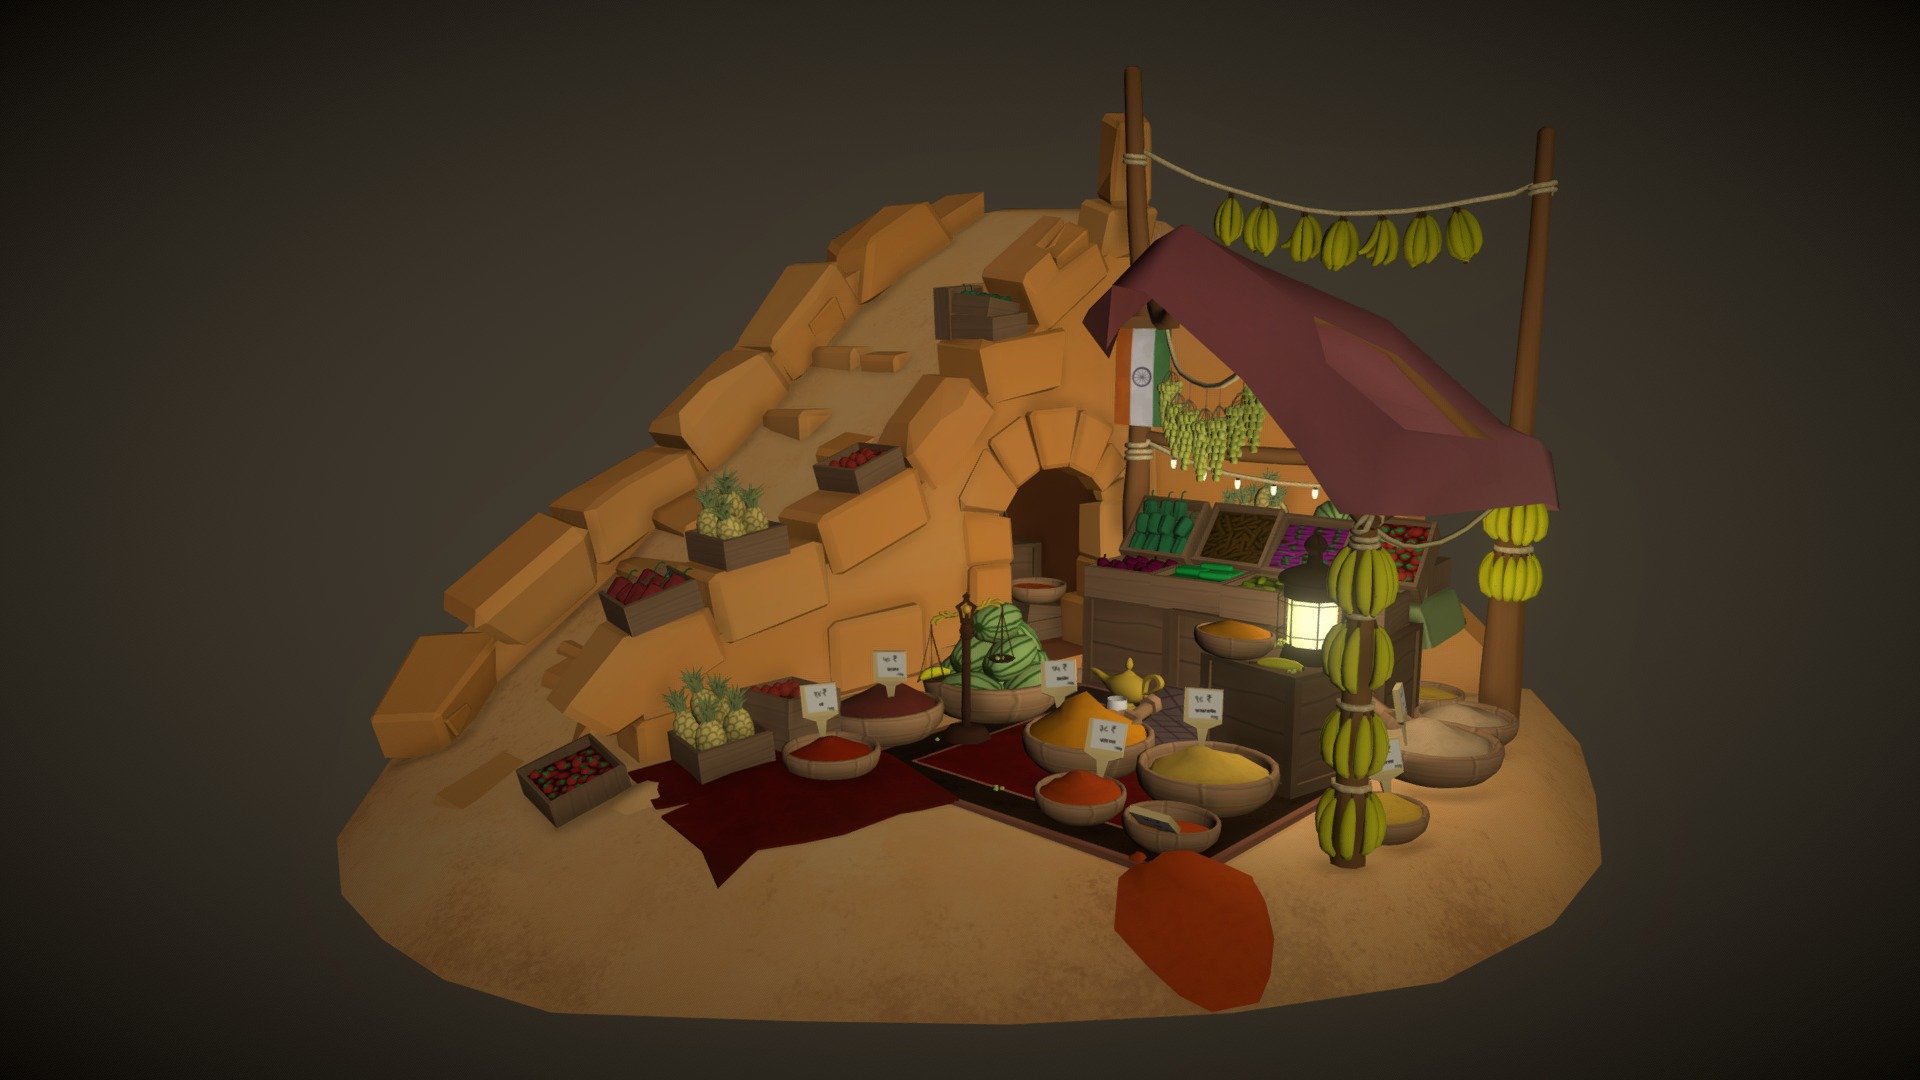 Poor Indian farmer's market, made for DAE @ Howest final project.  (11/20)

Handpainted using photoshop, modeled in maya on a 1024x1024 atlas map.

Albion Online style, set on a summer evening in the 1001 nights theme (India) - Farmer's market - Bazaar - Download Free 3D model by Louis Vanhove (@louisvanhove) 3d model